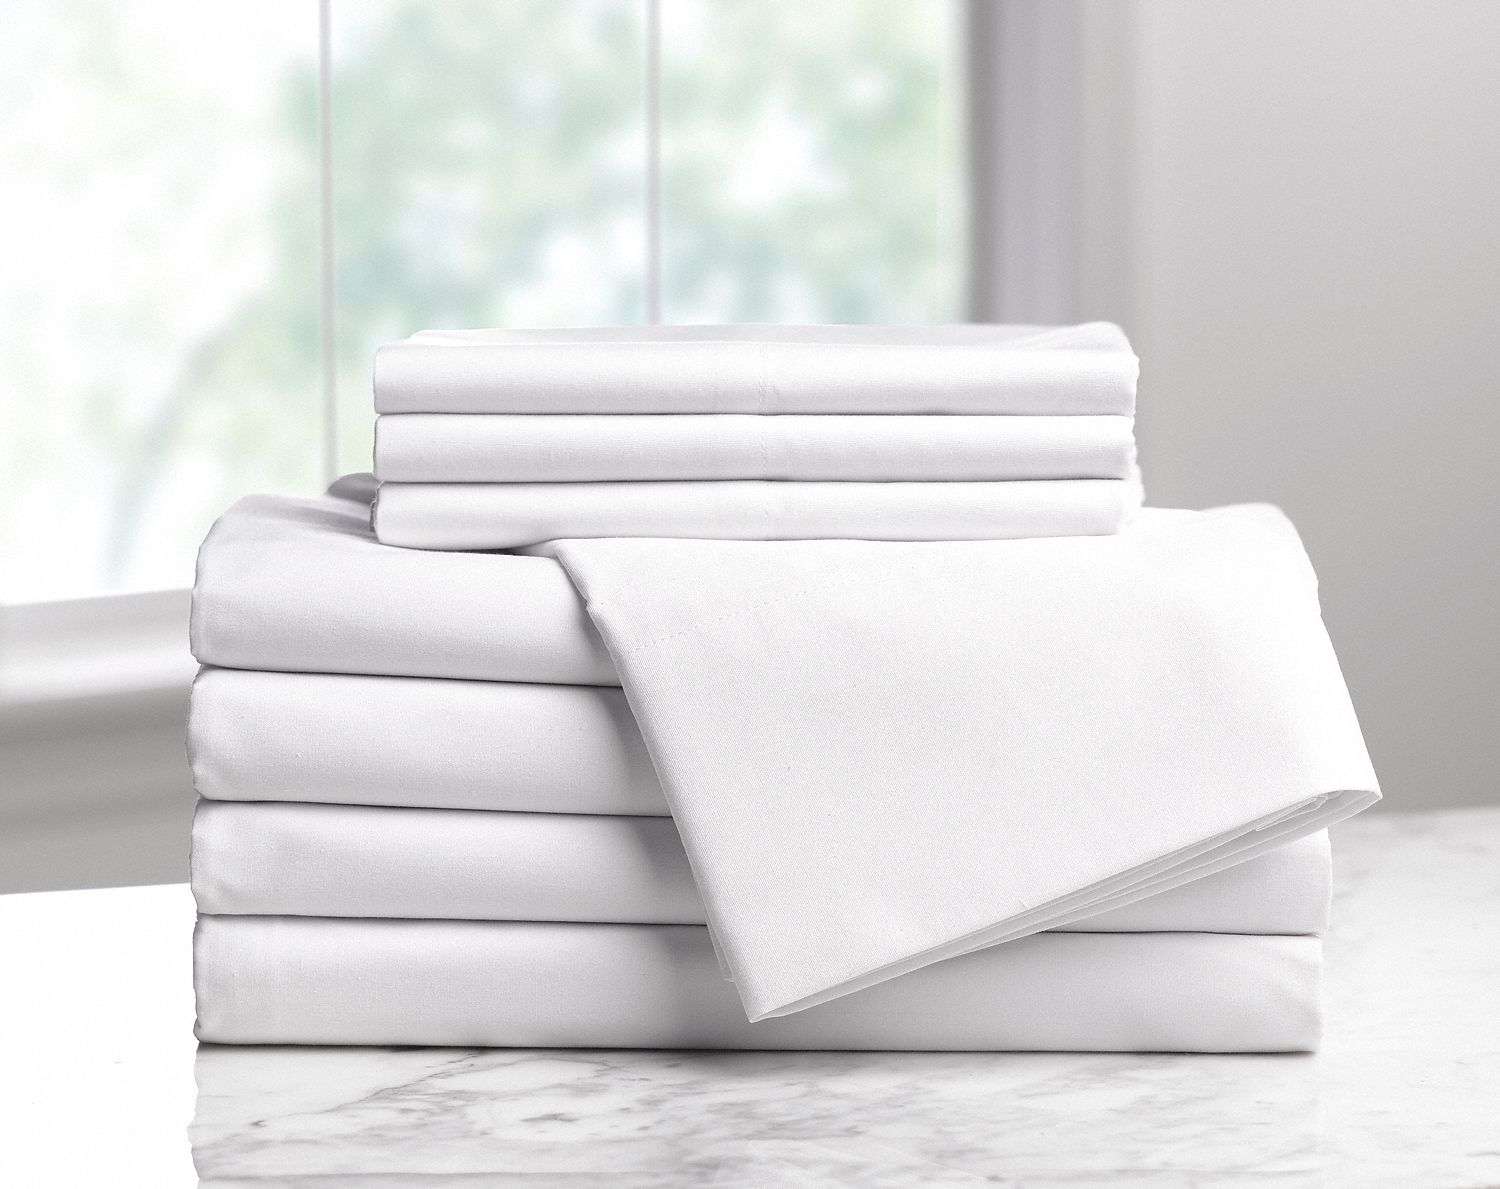 Flat Sheet: Flat, King, 111 in Wd, 110 in Lg, 60% Cotton/40% Polyester Fabric, T200, 6 PK